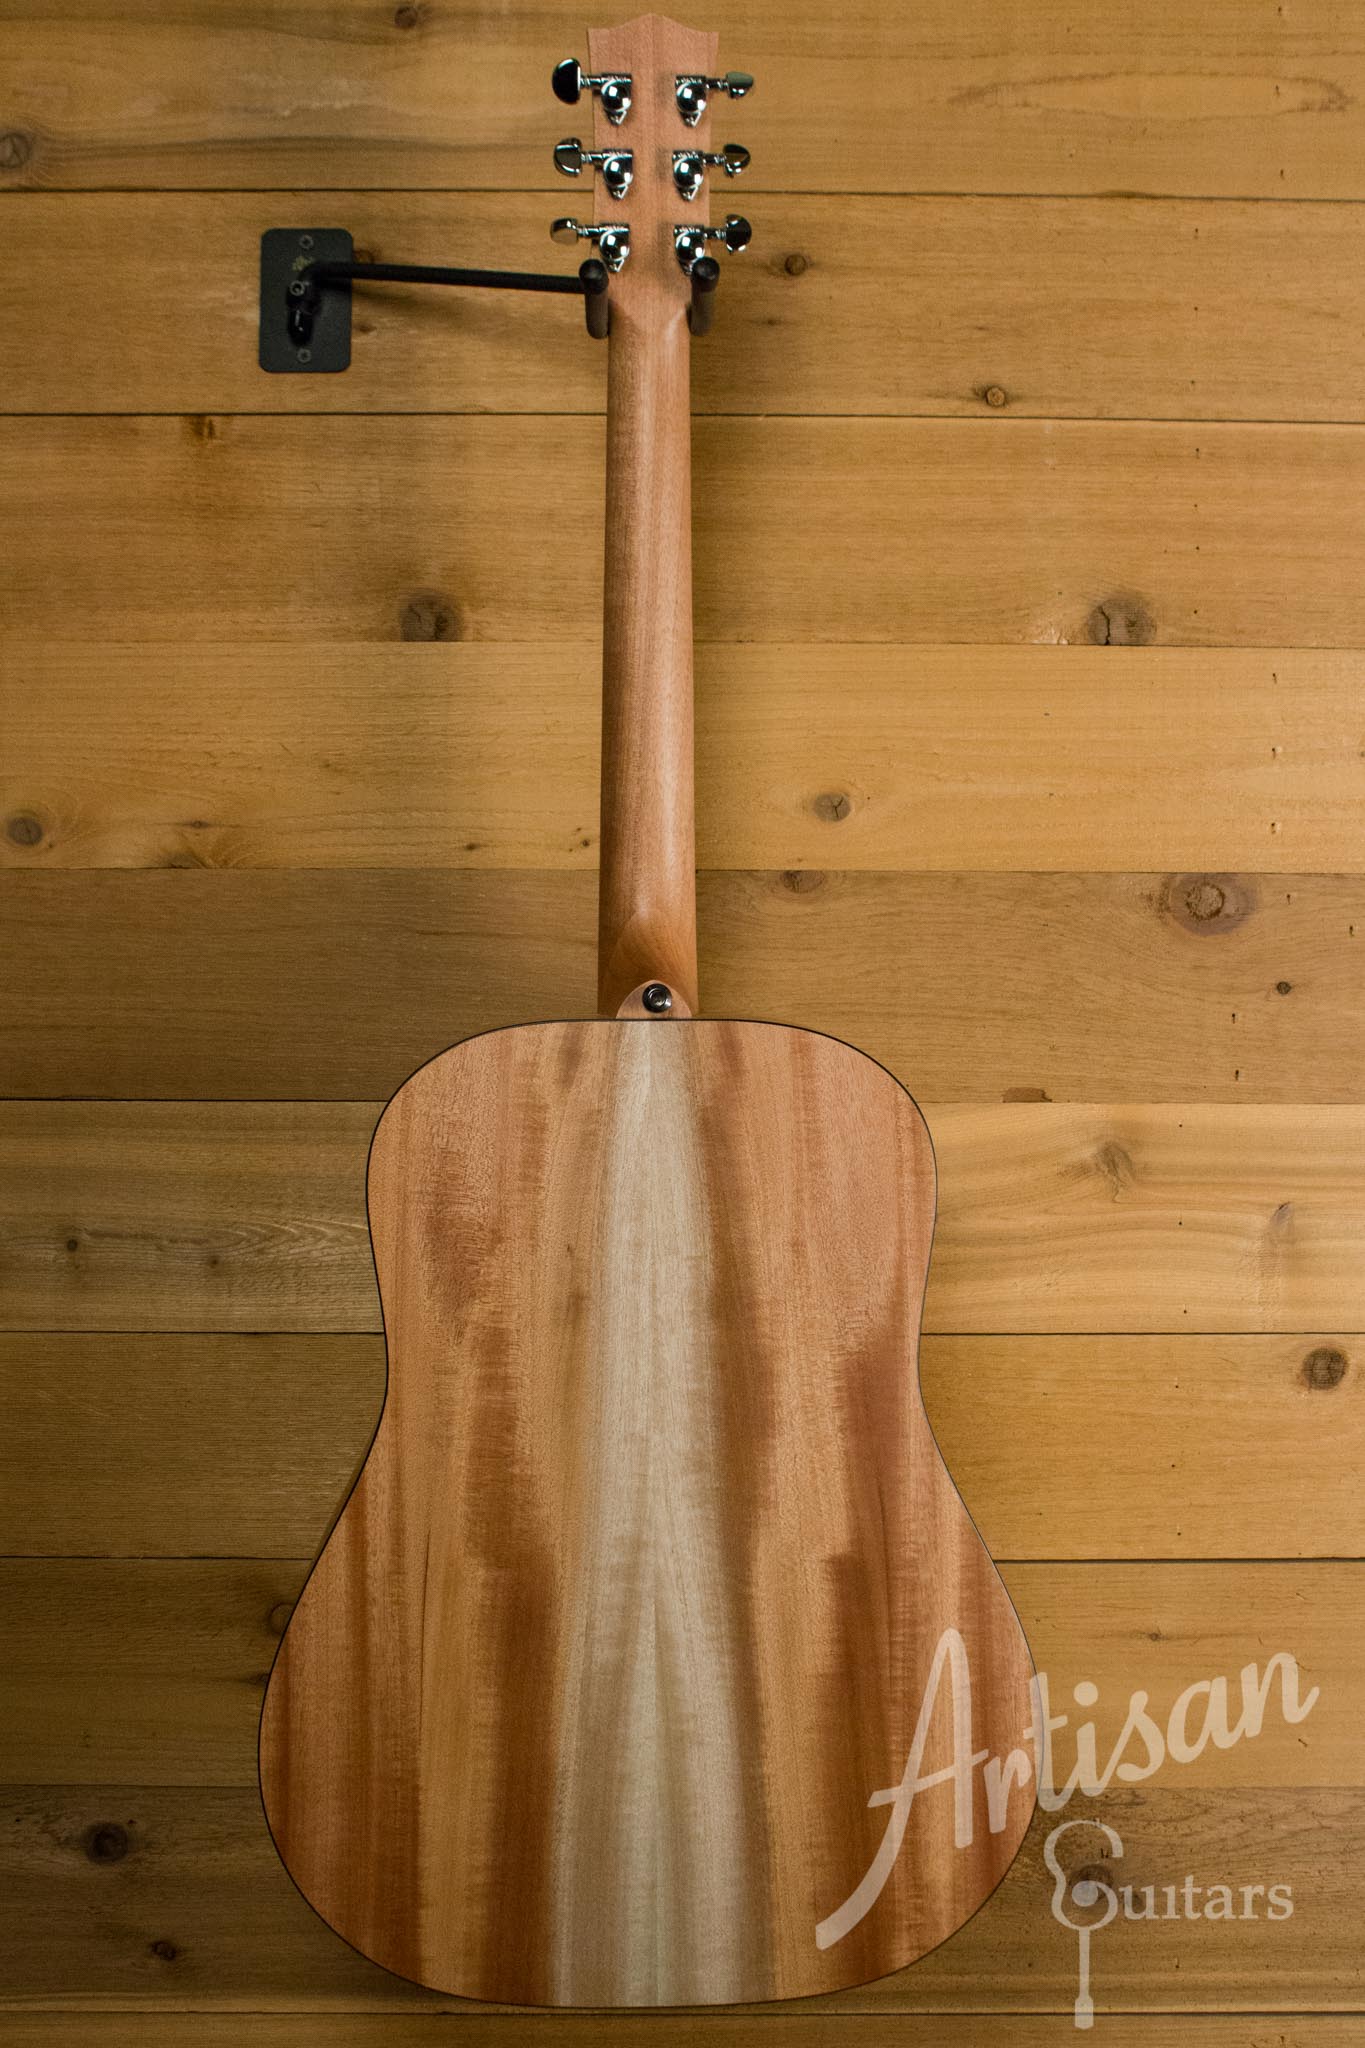 Maton S60 Guitar with Bearclaw Sitka Spruce and Queensland Maple ID-10553 - Artisan Guitars